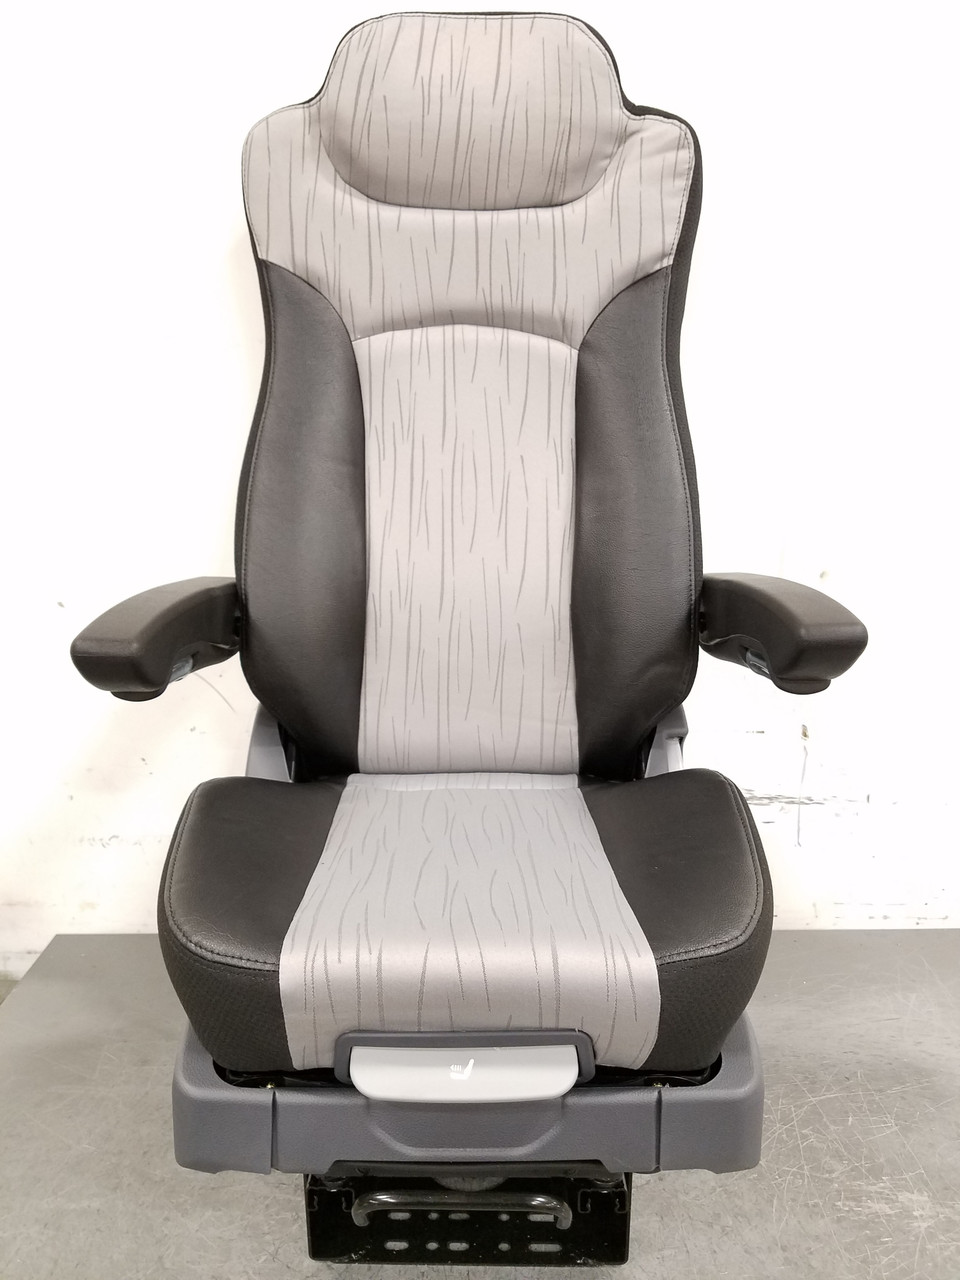 Prime TC400 Series Air Ride SEATS by Prime Seating